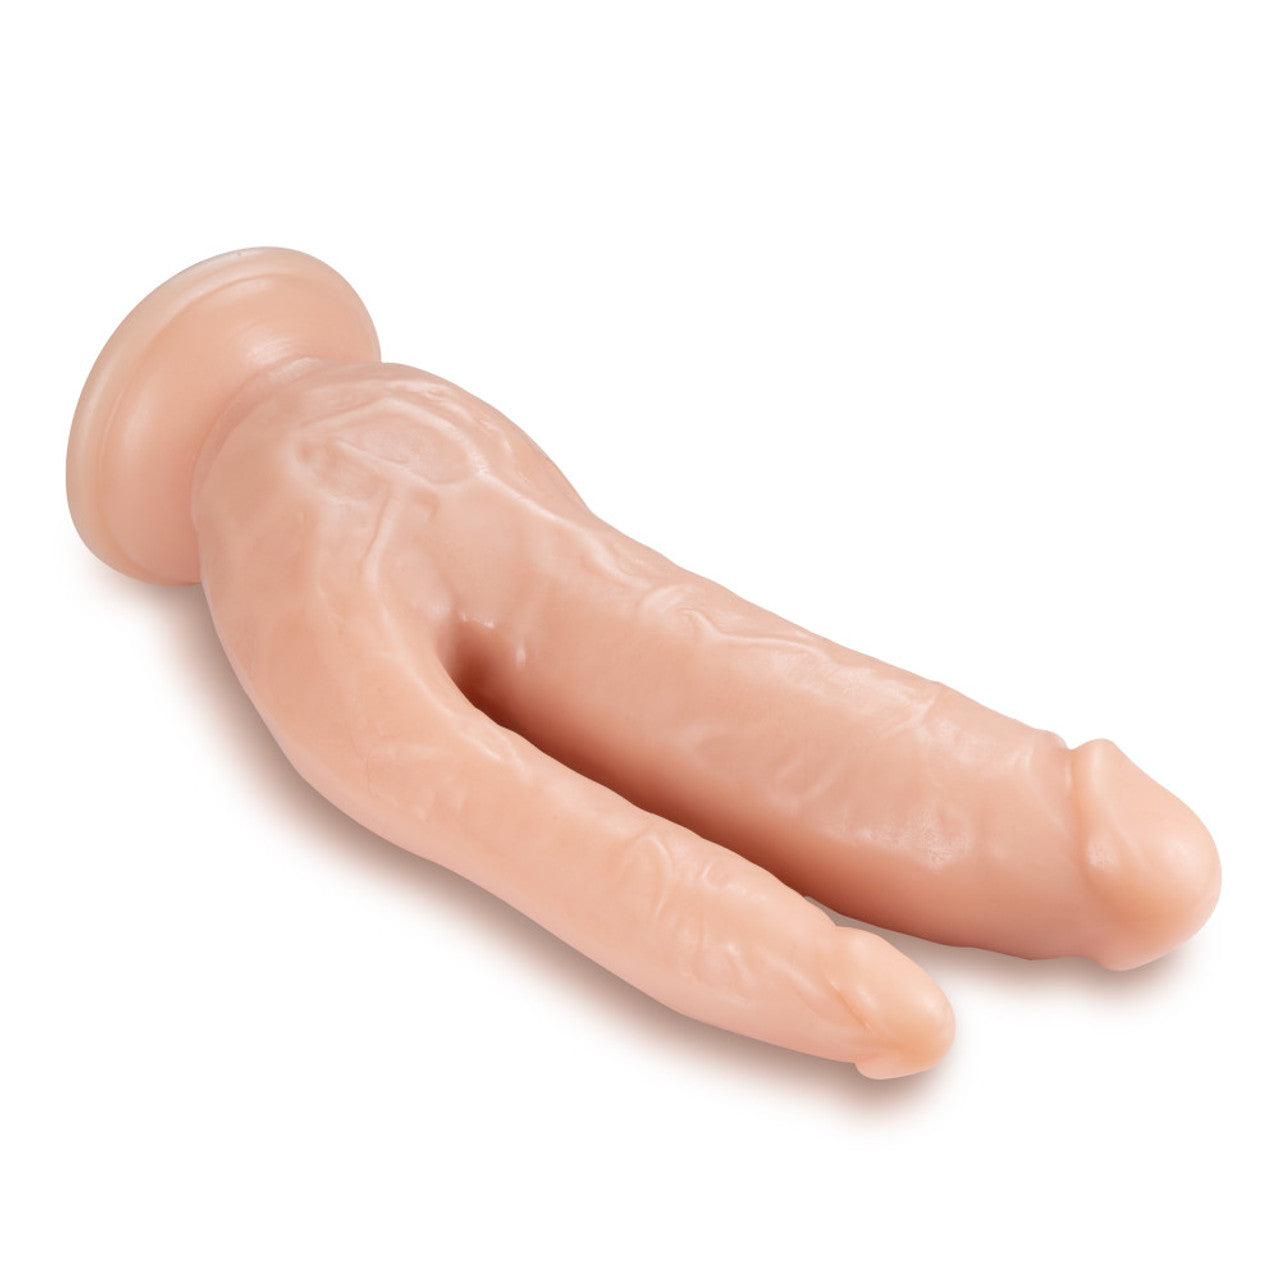 Dr. Skin 8 Inch DP Cock - Vanilla - Thorn & Feather